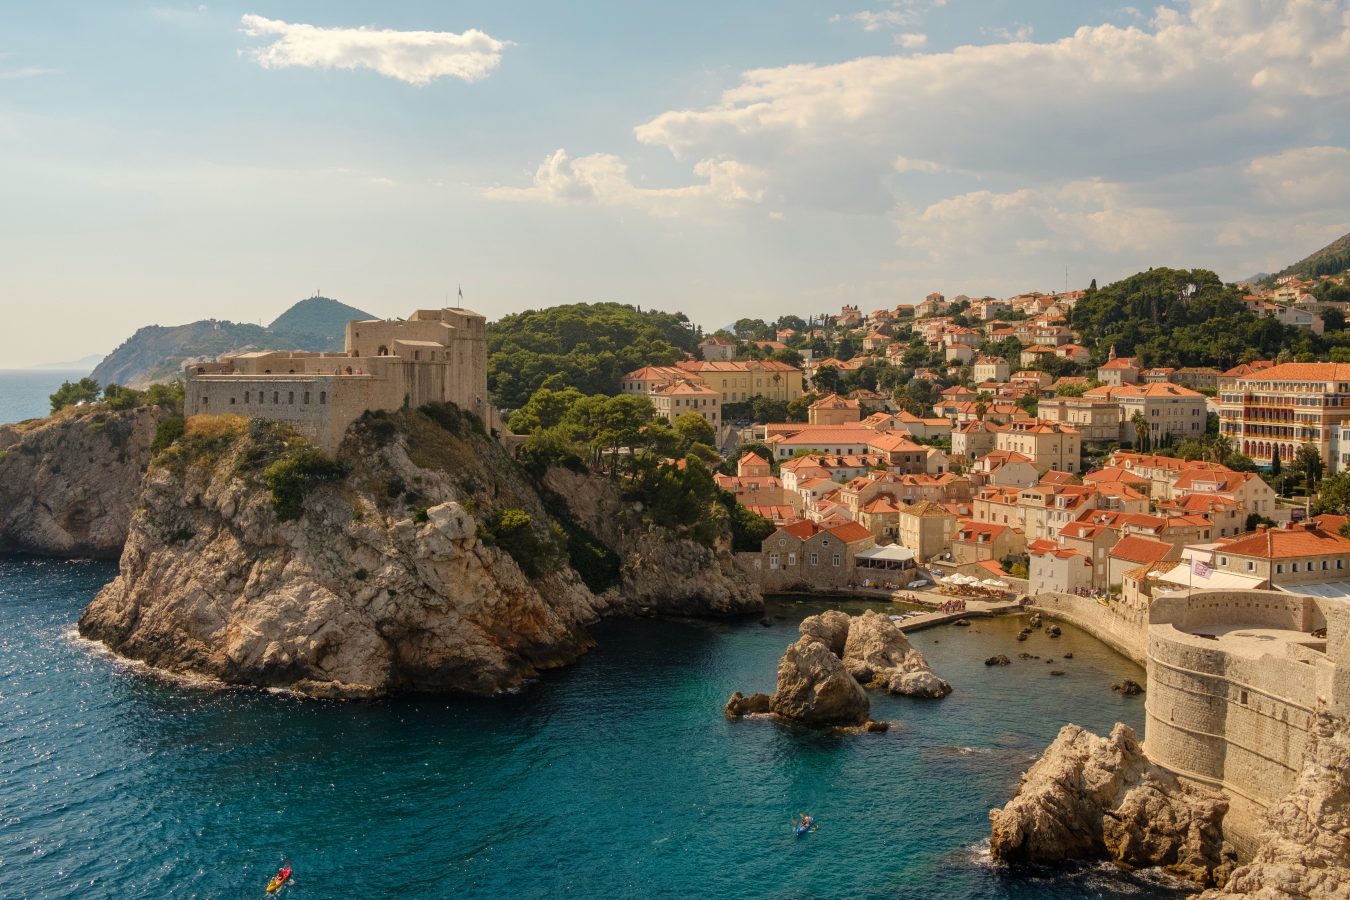 Croatian coastline with old buildings. Croatia is a perfect destination for summer 2023.